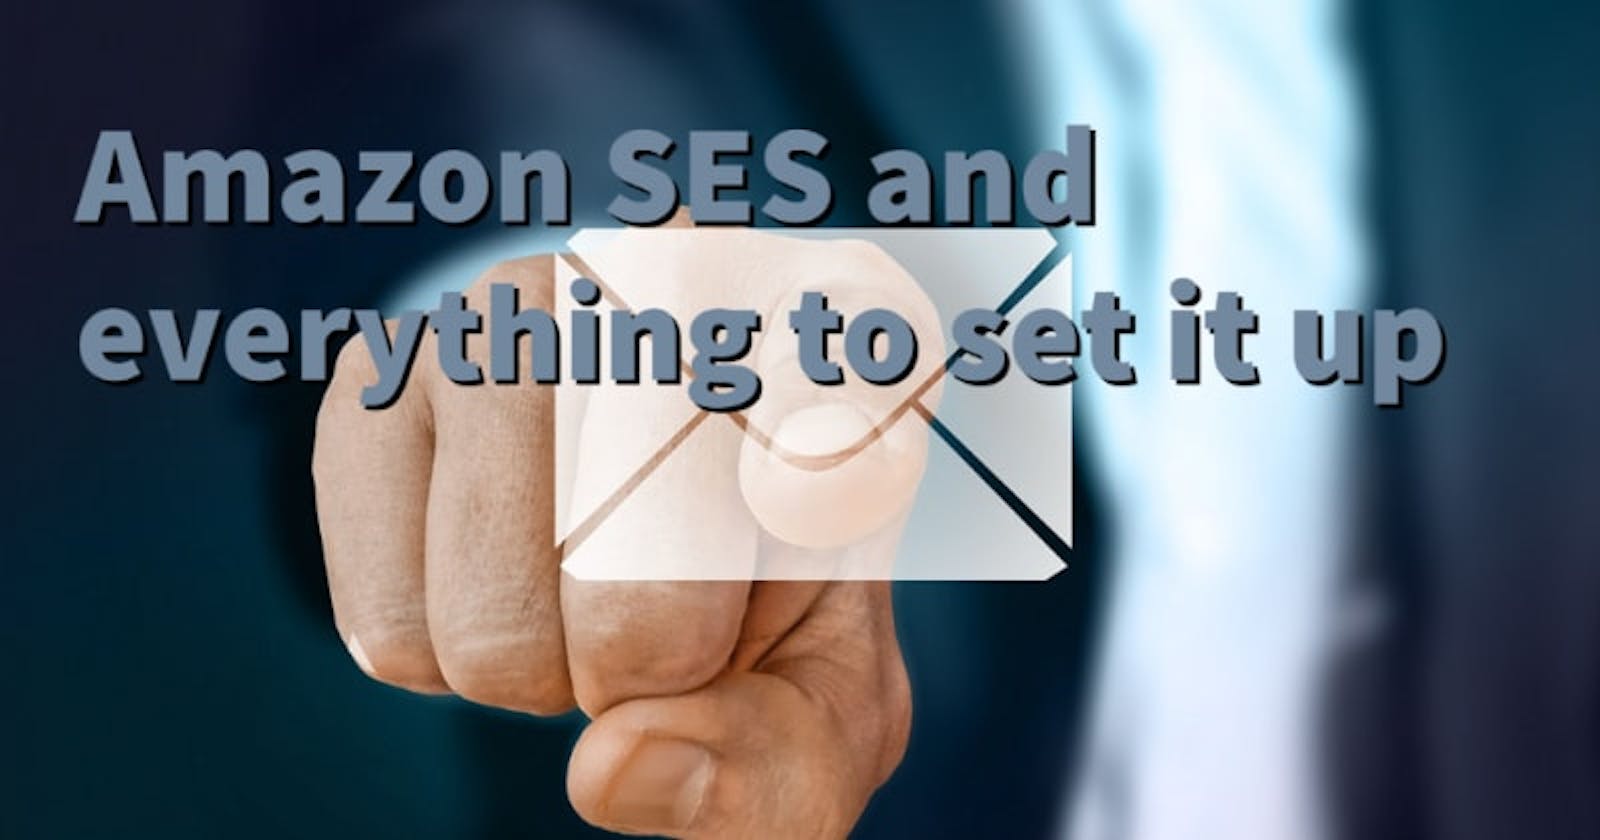 Amazon SES and everything to set it up